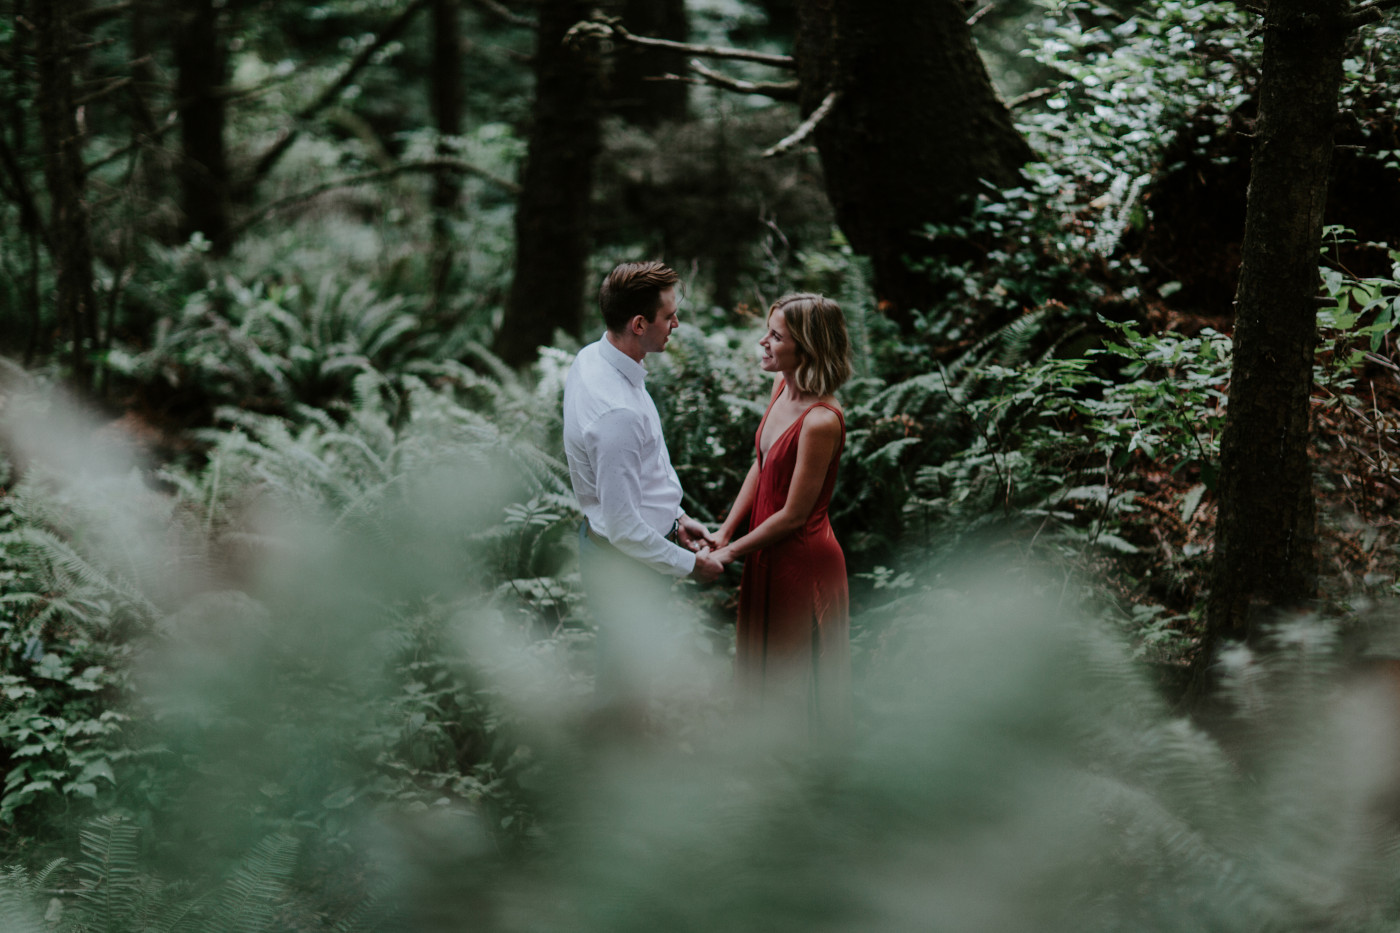 Chelsey and Billy stand together in the forest near Cannon Beach. Elopement wedding photography at Cannon Beach by Sienna Plus Josh.